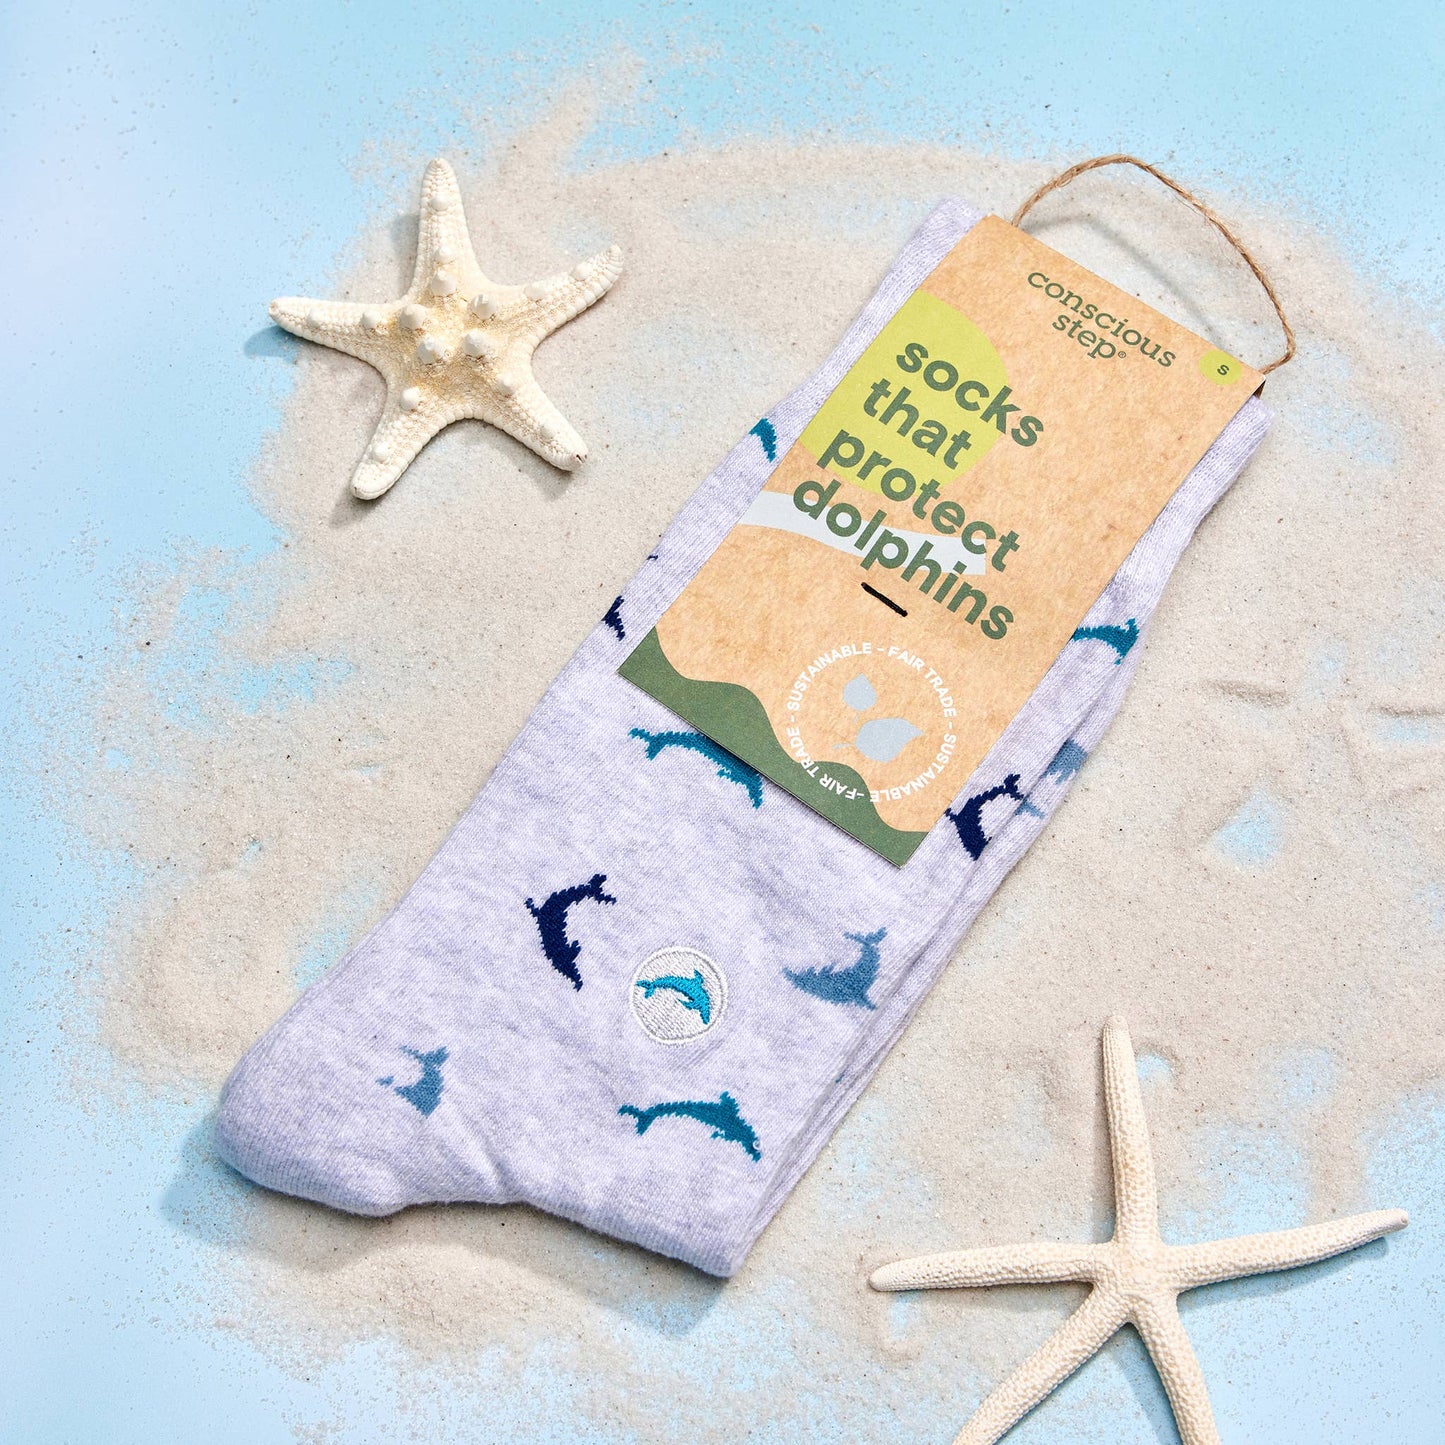 Conscious Step - Socks that Protect Dolphins  Conscious Step   -better made easy-eco-friendly-sustainable-gifting